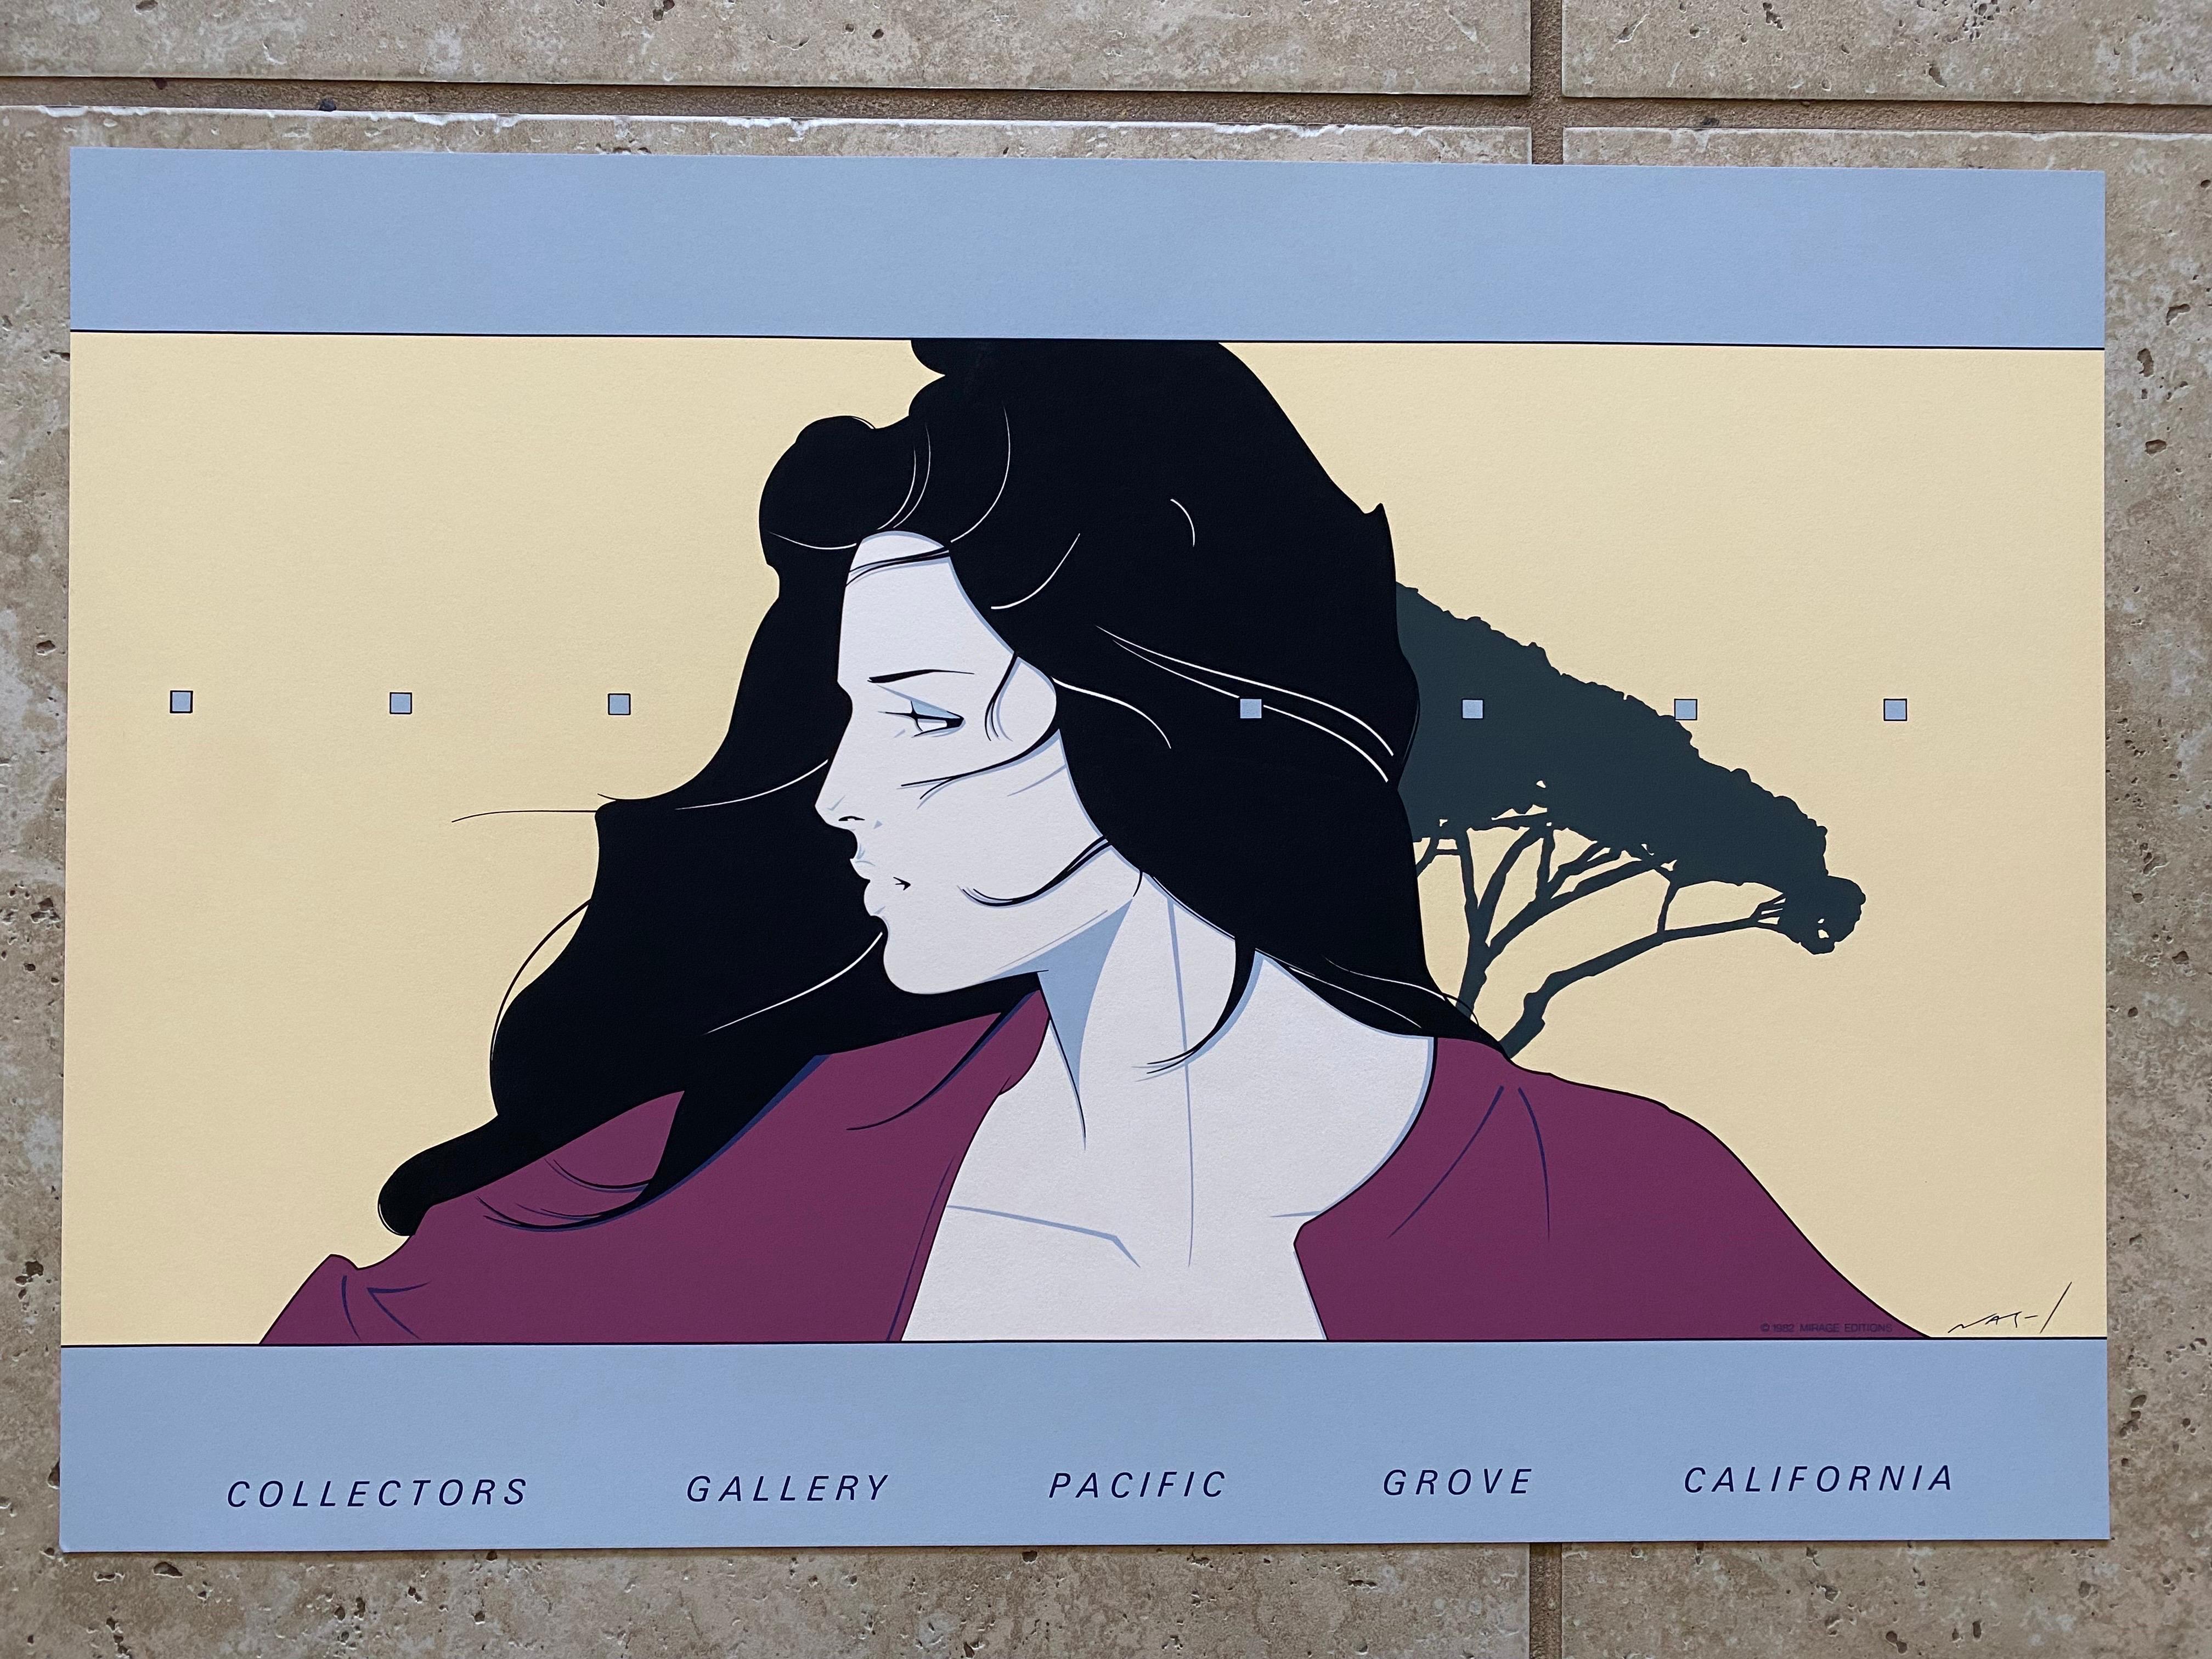 Cool vintage Patrick Nagel Serigraph print produced in 1982 by Mirage Editions in Santa Monica, Ca for Collectors Gallery in Pacific Grove, CA. This print is signed in Plate by the artist Patrick Nagel.

This serigraph on archival grade heavyweight